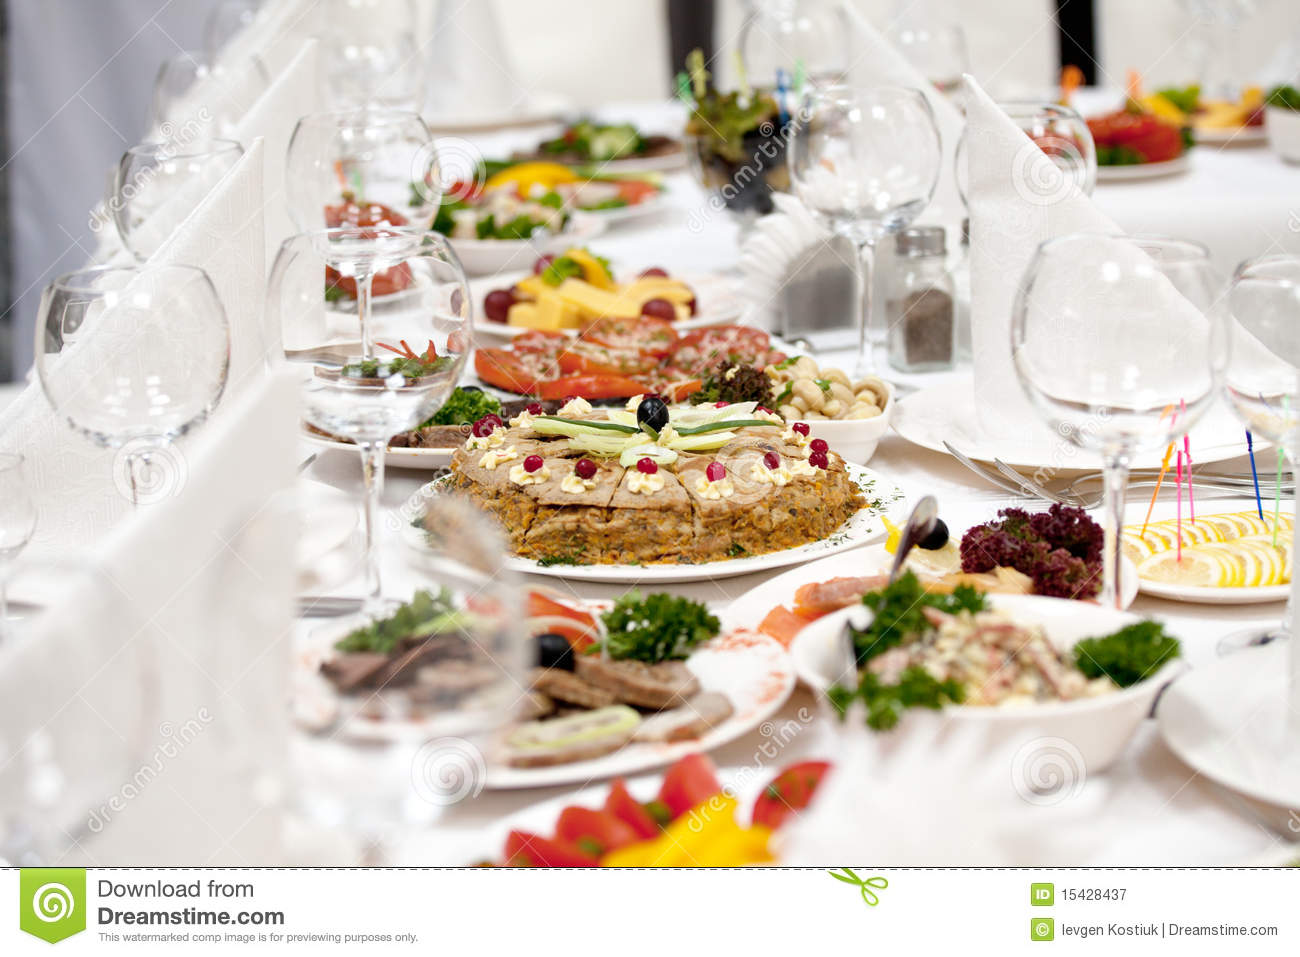 Banquet Table Royalty Free Stock Photography   Image  15428437